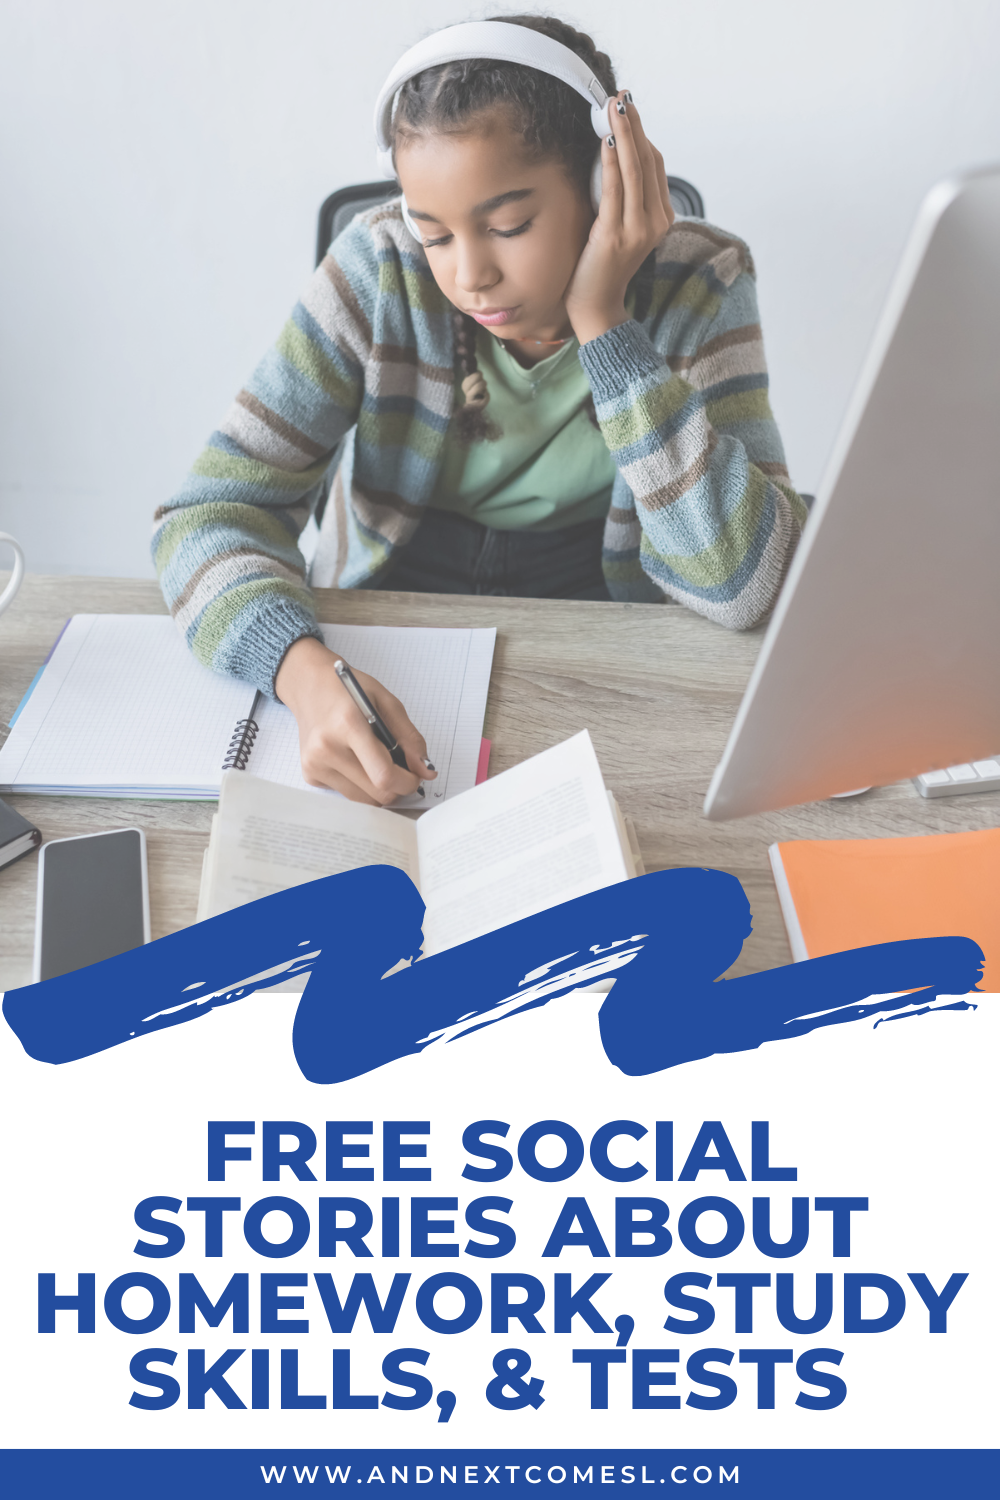 Free social stories about homework, study skills, and tests